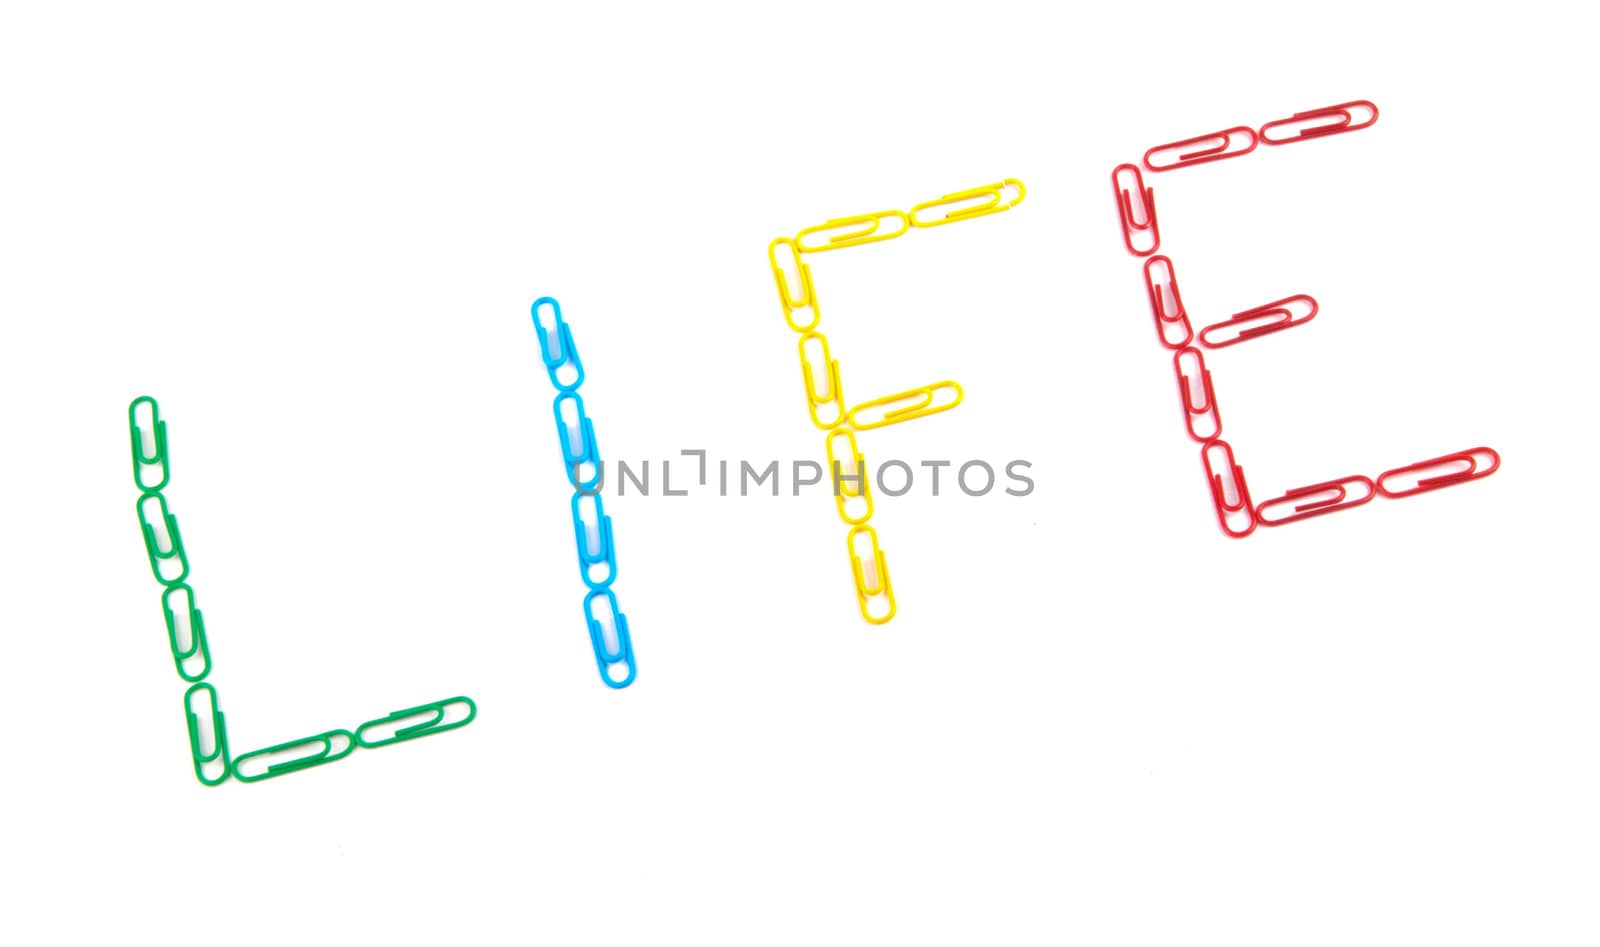 word "life" made with multicolored paper clips